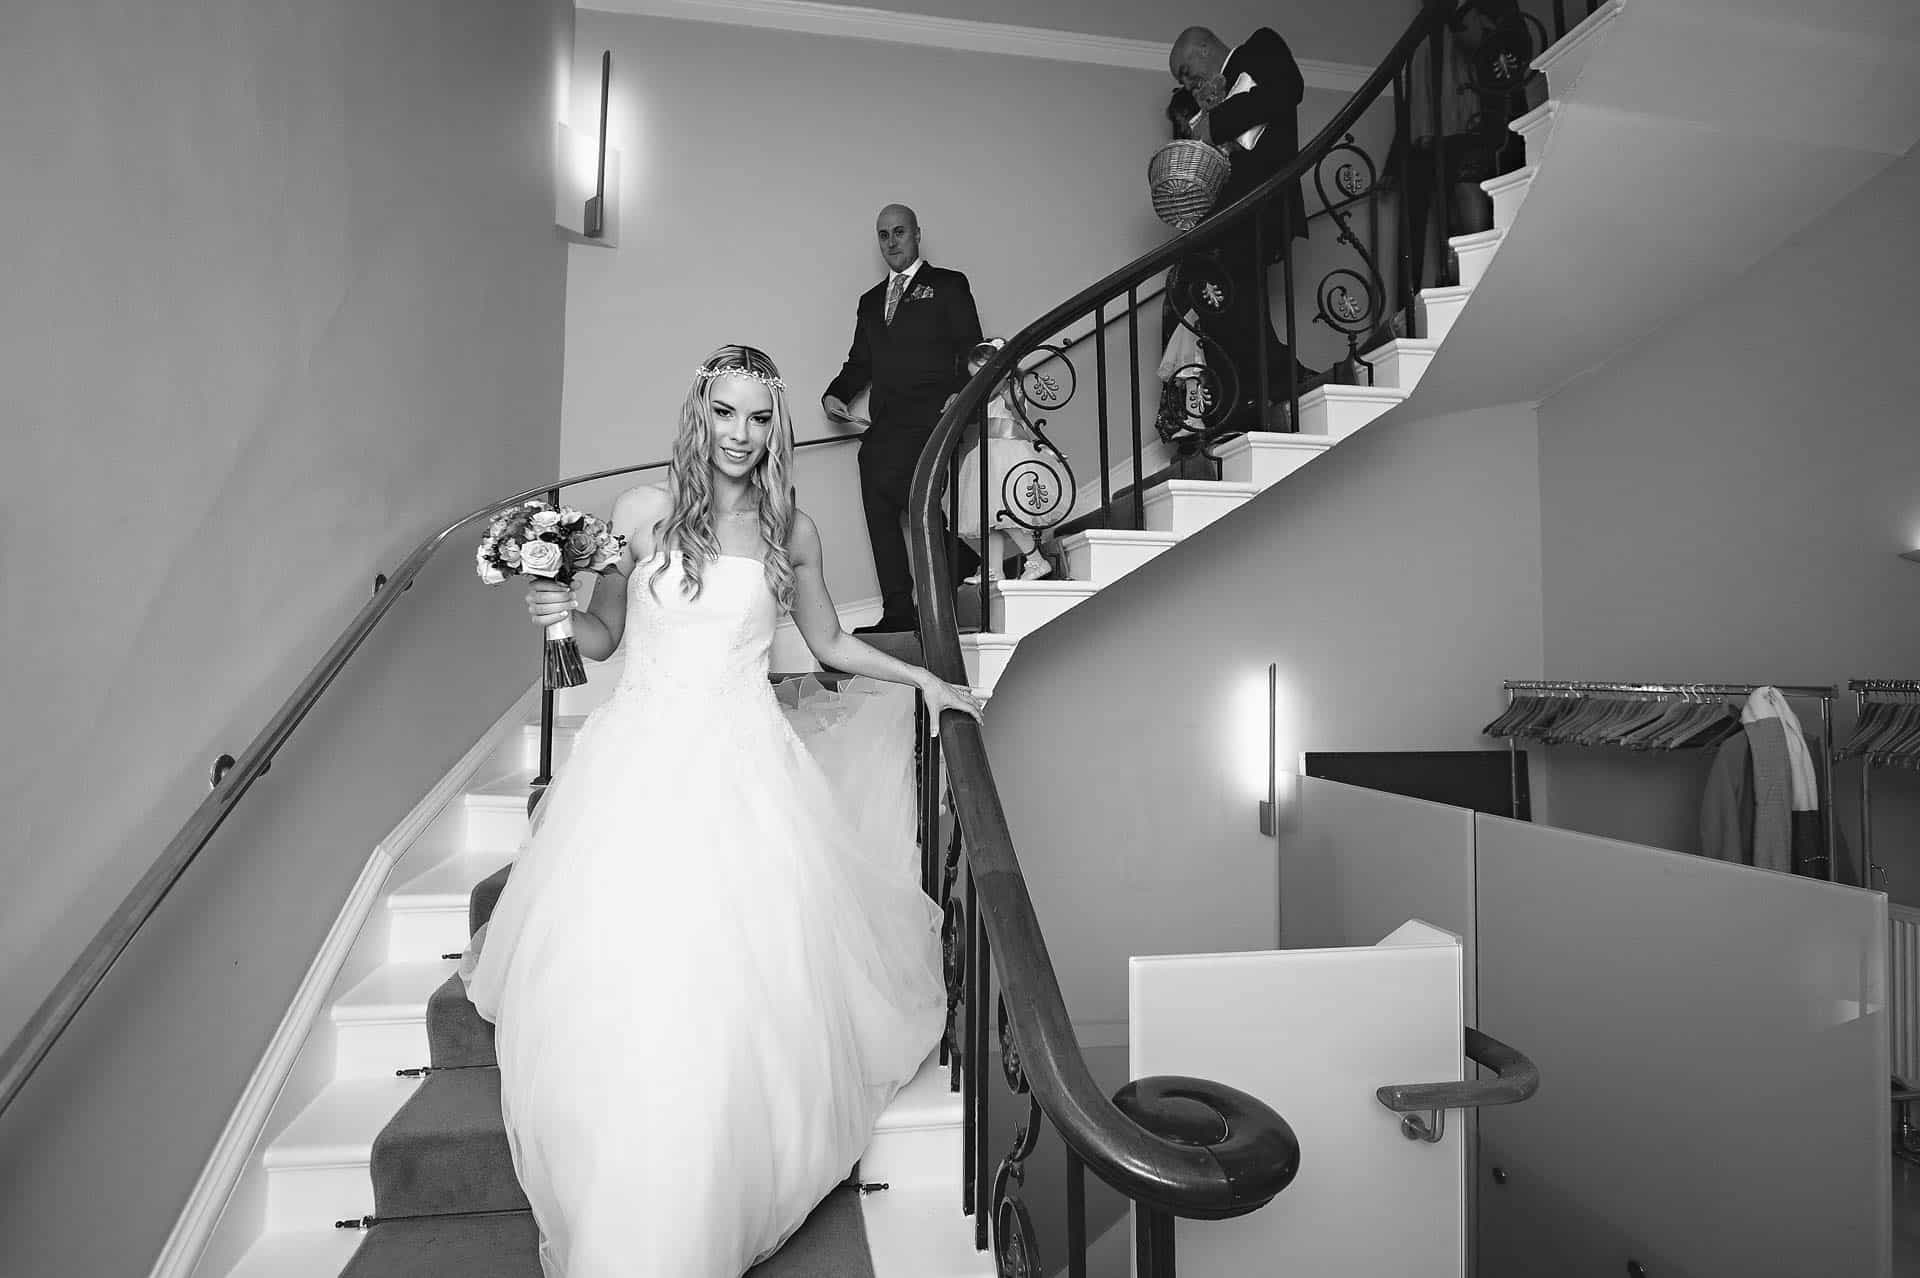 Asia House Wedding Photography - Bride and Groom descending stairs